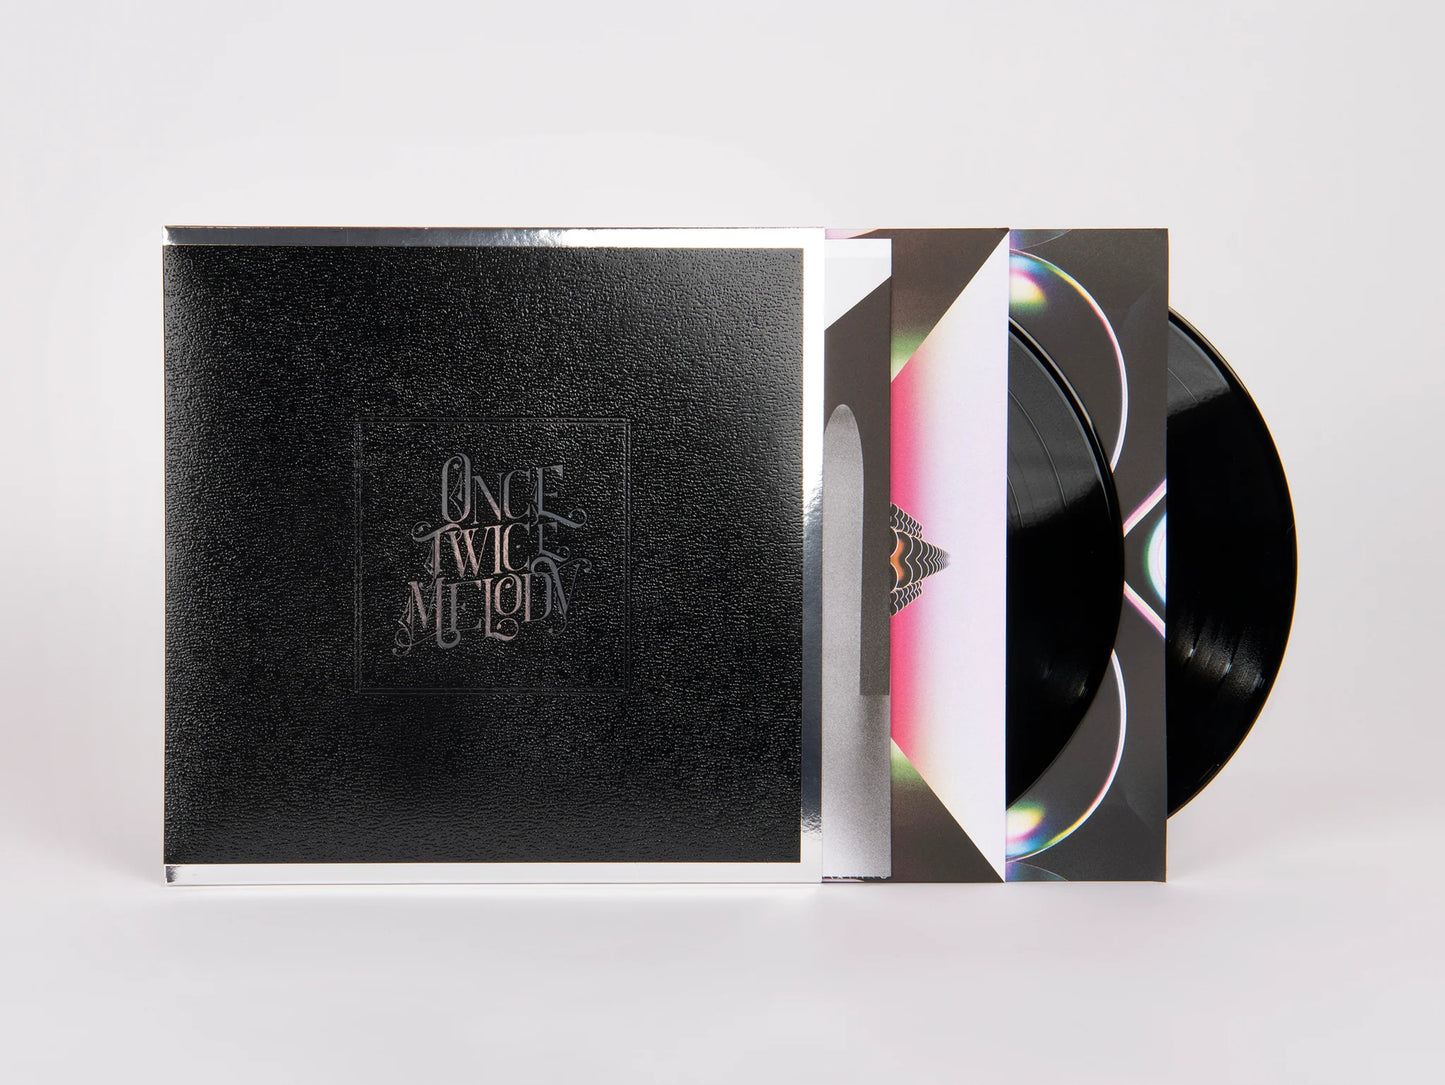 Beach House - Once Twice Melody (Double 140g Black Vinyl. Wide Spine Outer Sleeve – Silver and Black Print, Inner Sleeves and Pull Out Poster 24” x 36”)